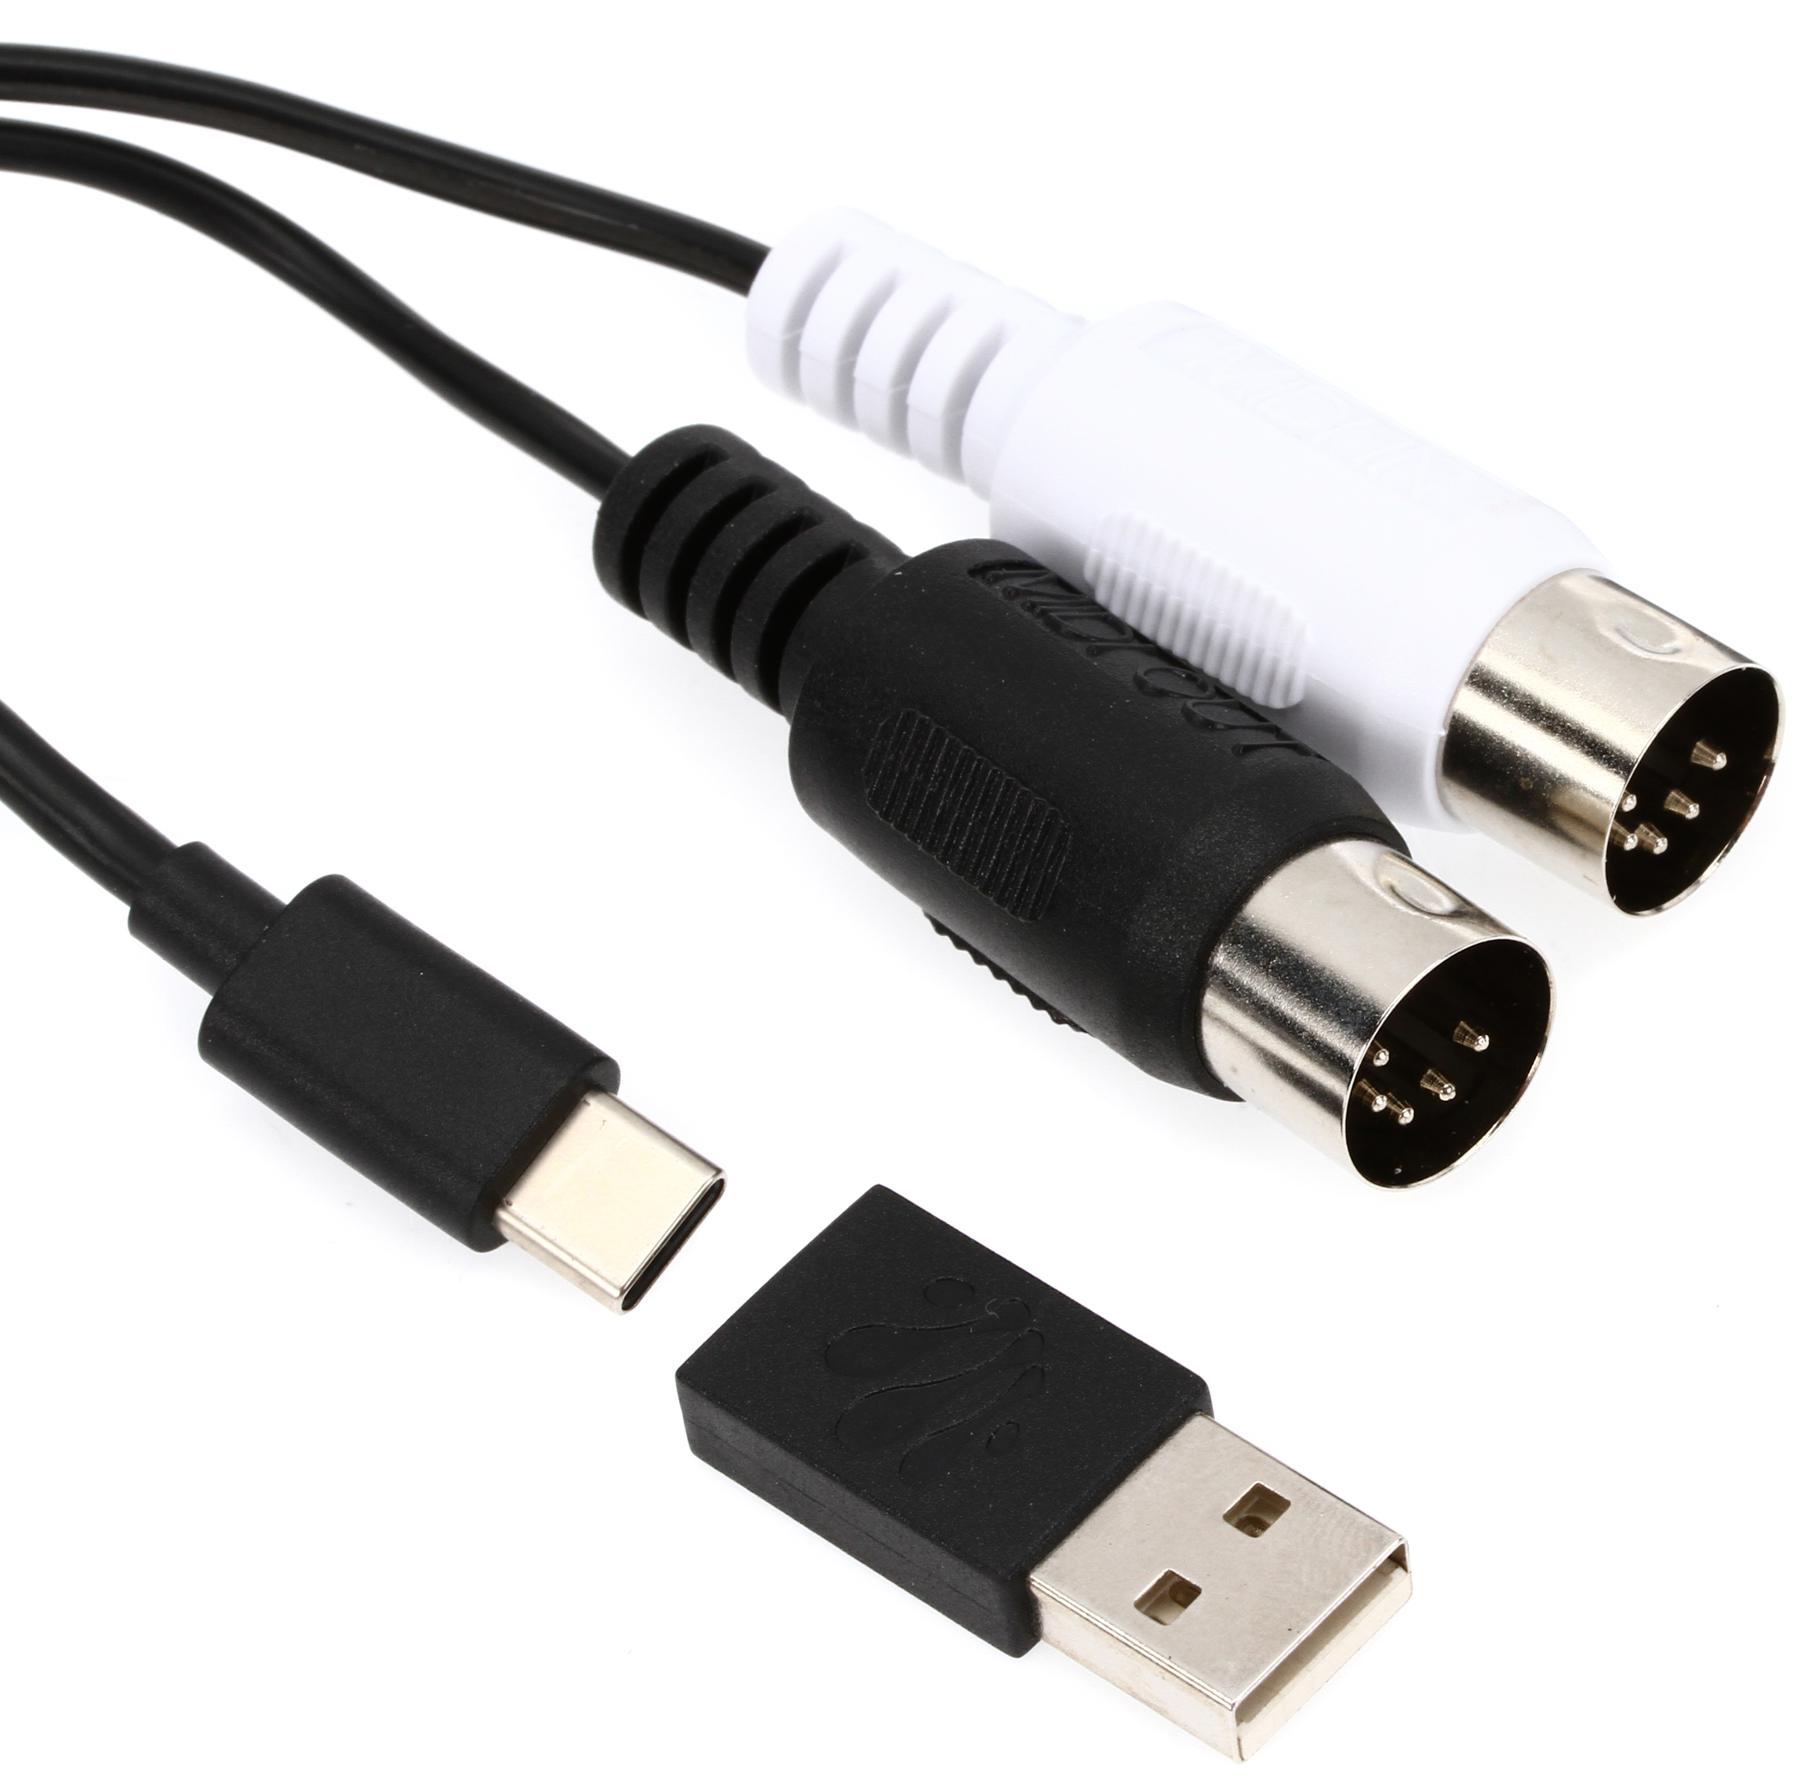 ART MConnect USB to MIDI Cable